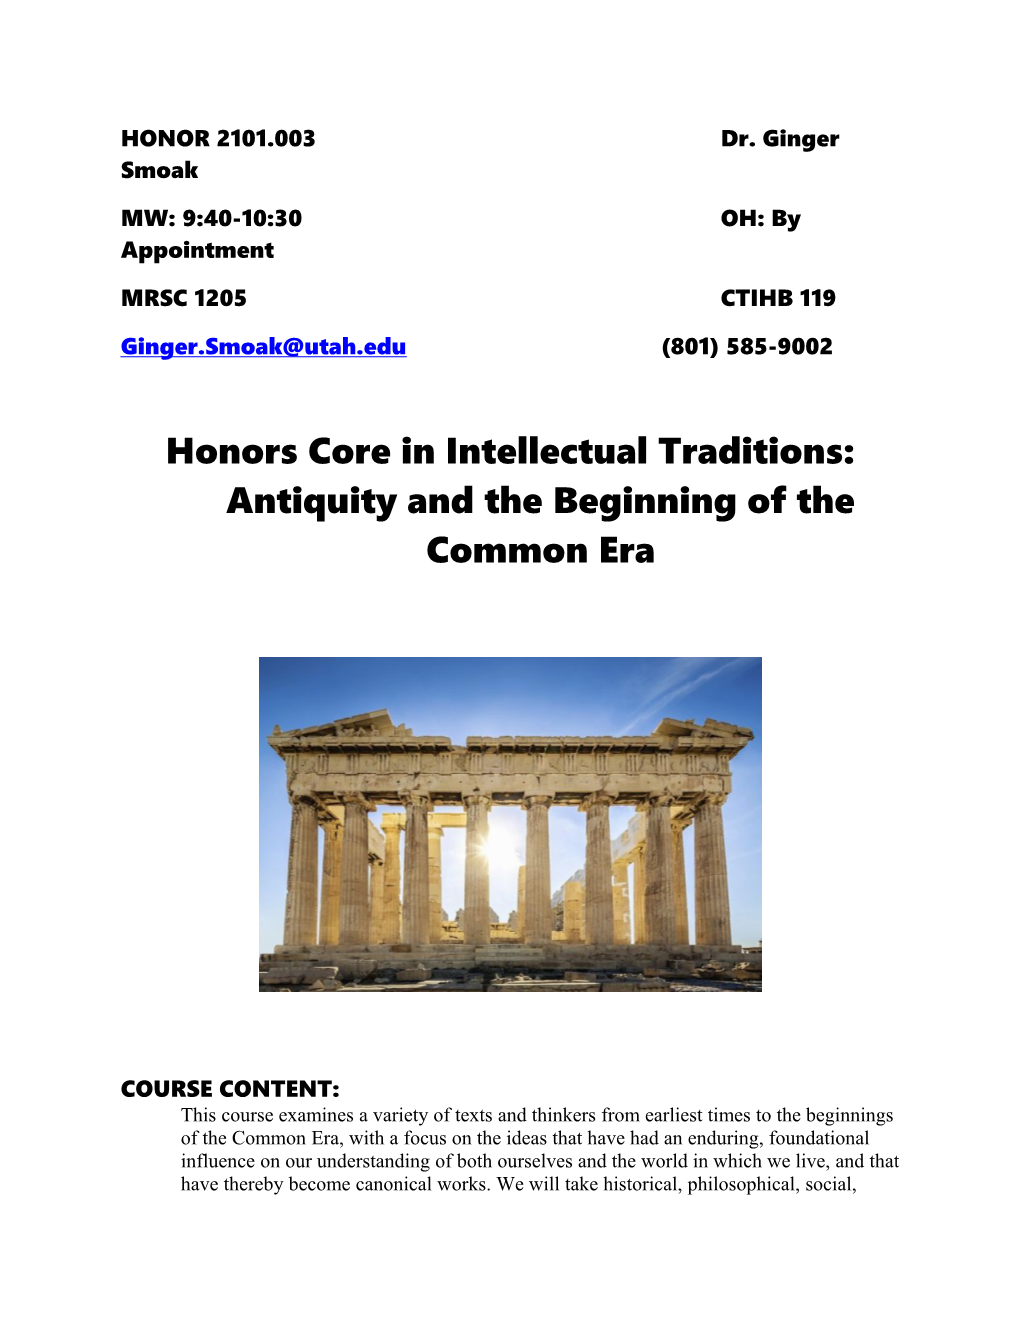 Honors Core in Intellectual Traditions: Antiquity and the Beginning of the Common Era